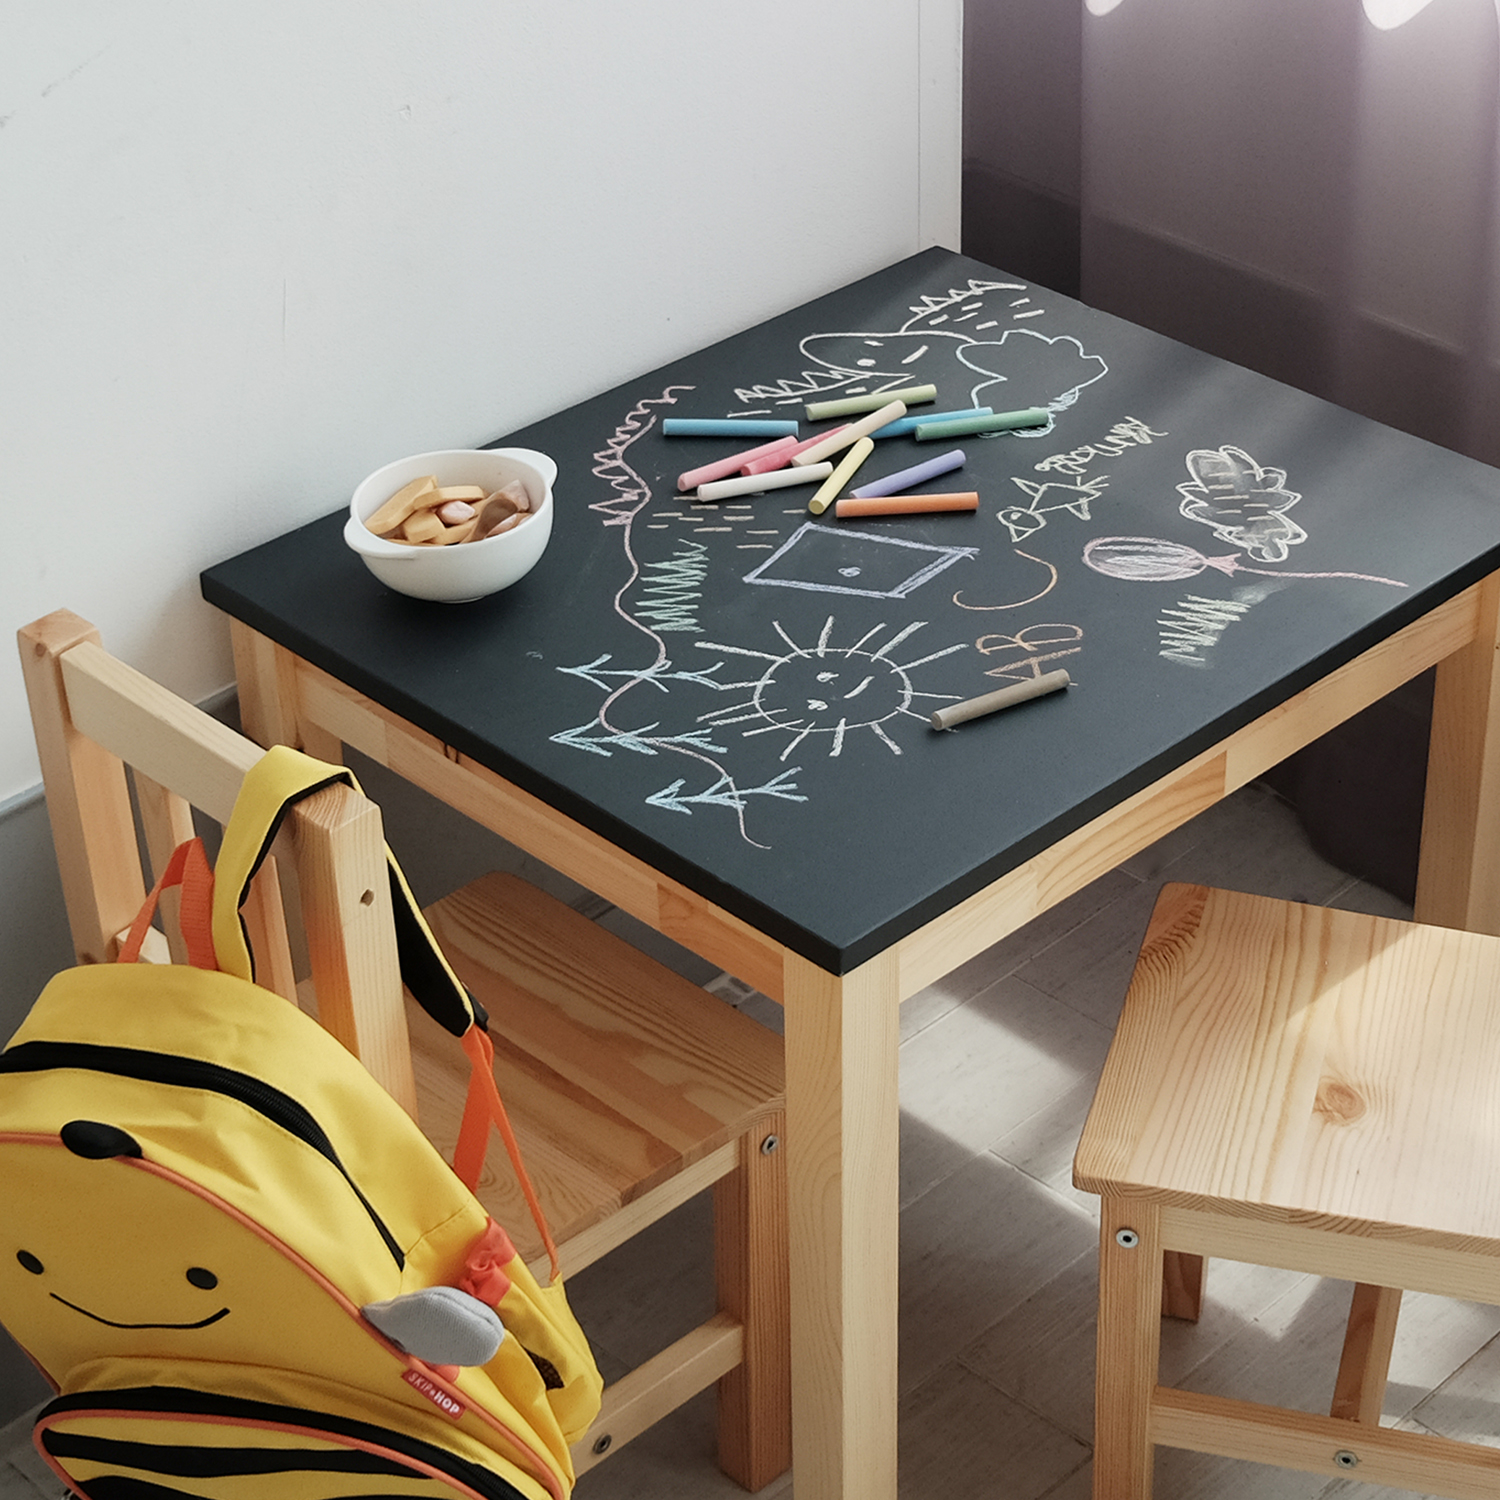 Let your children’s creativity run wild with chalkboard paint on their walls